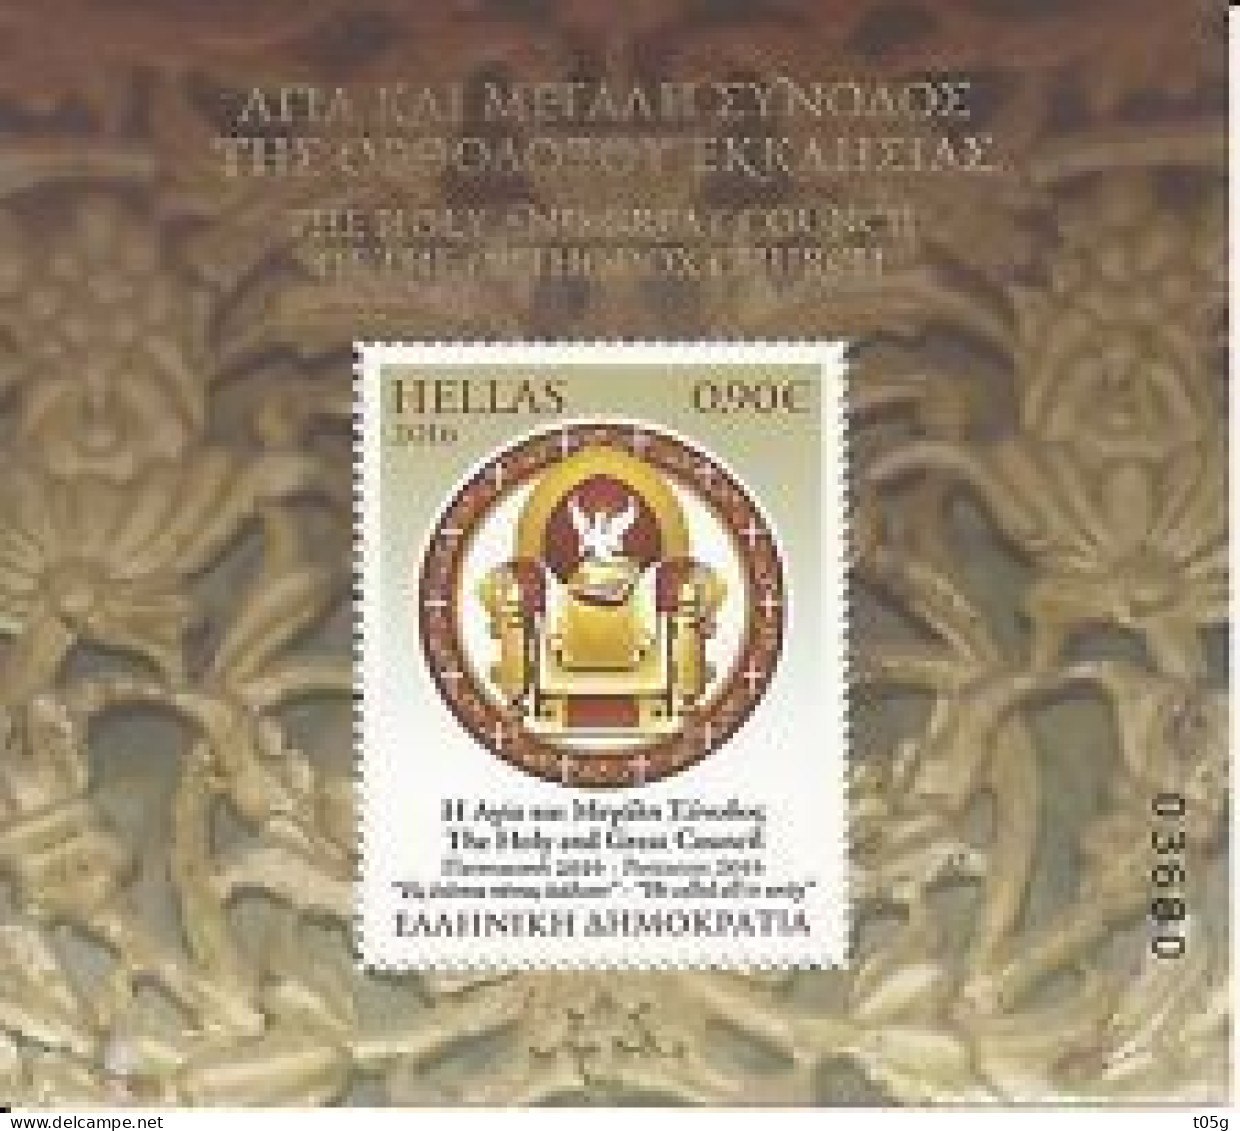 GREECE- GRECE -HELLAS 2016: ANNIVERSARIES & EVENTS/THE HOLY & GREAT COUNCIL OF THE ORTHODOX  CHURCH Set MNH** - Ongebruikt